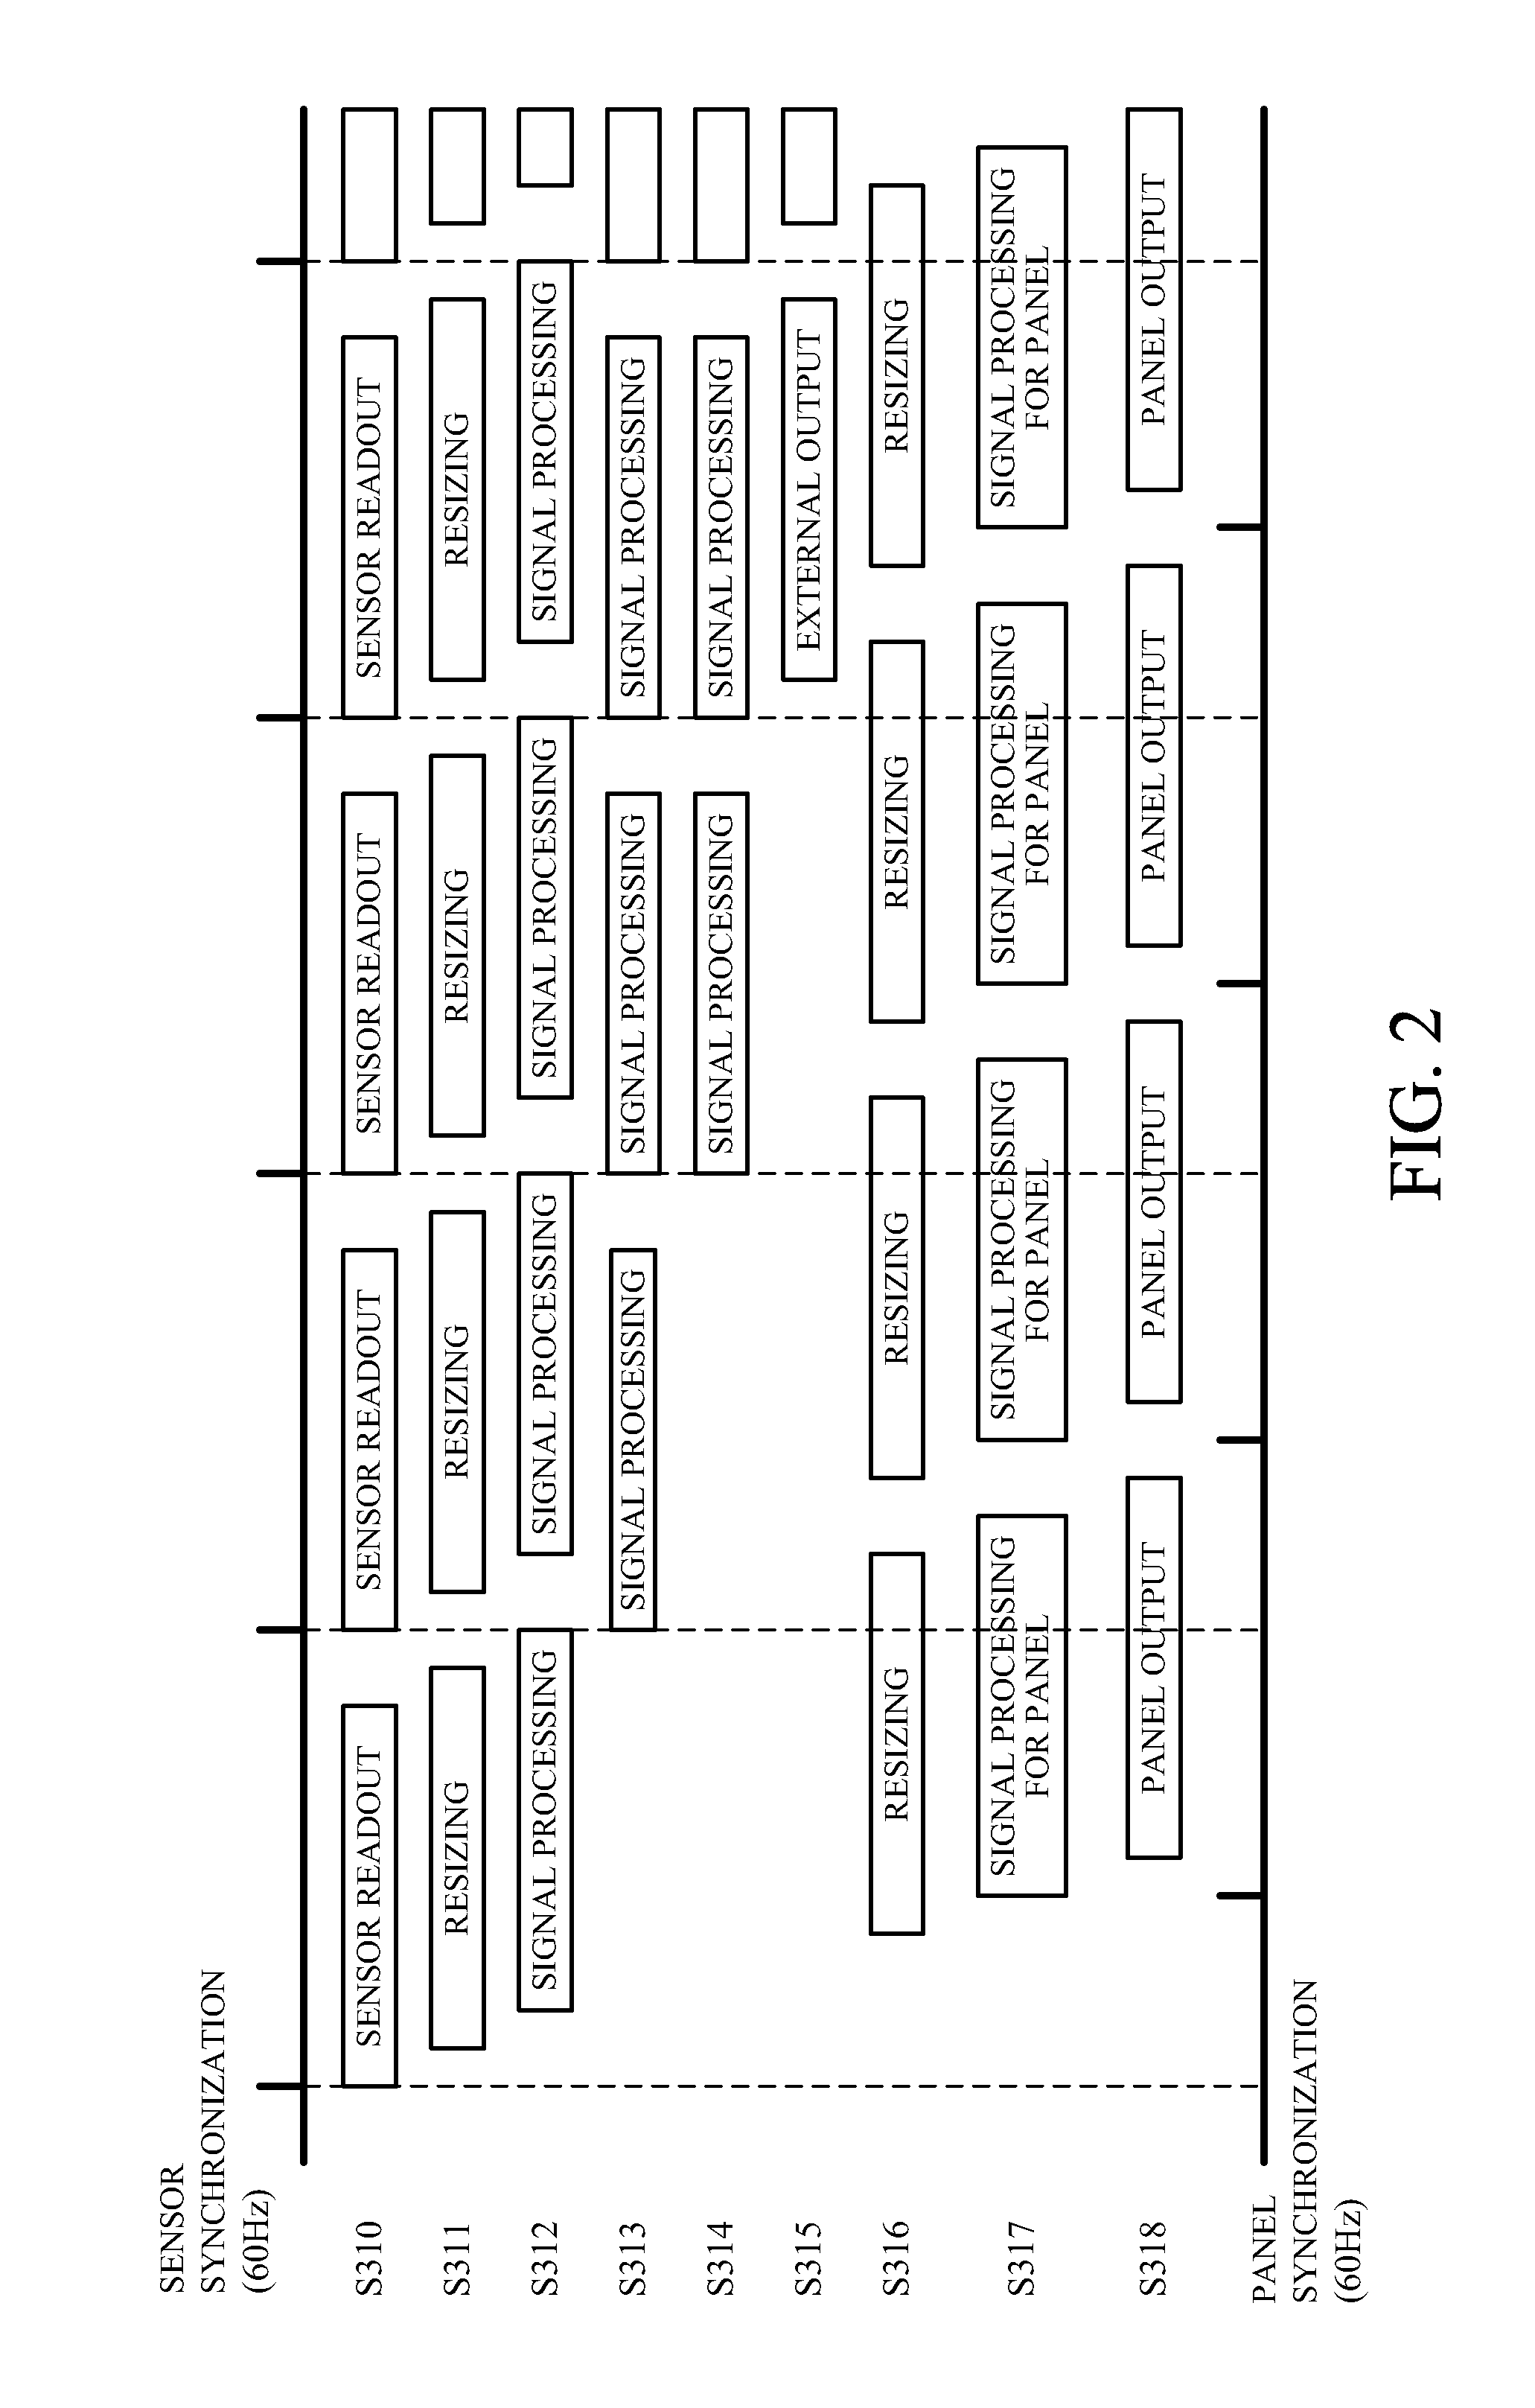 Image signal processing apparatus and a control method thereof, and an image pickup apparatus and a control method thereof